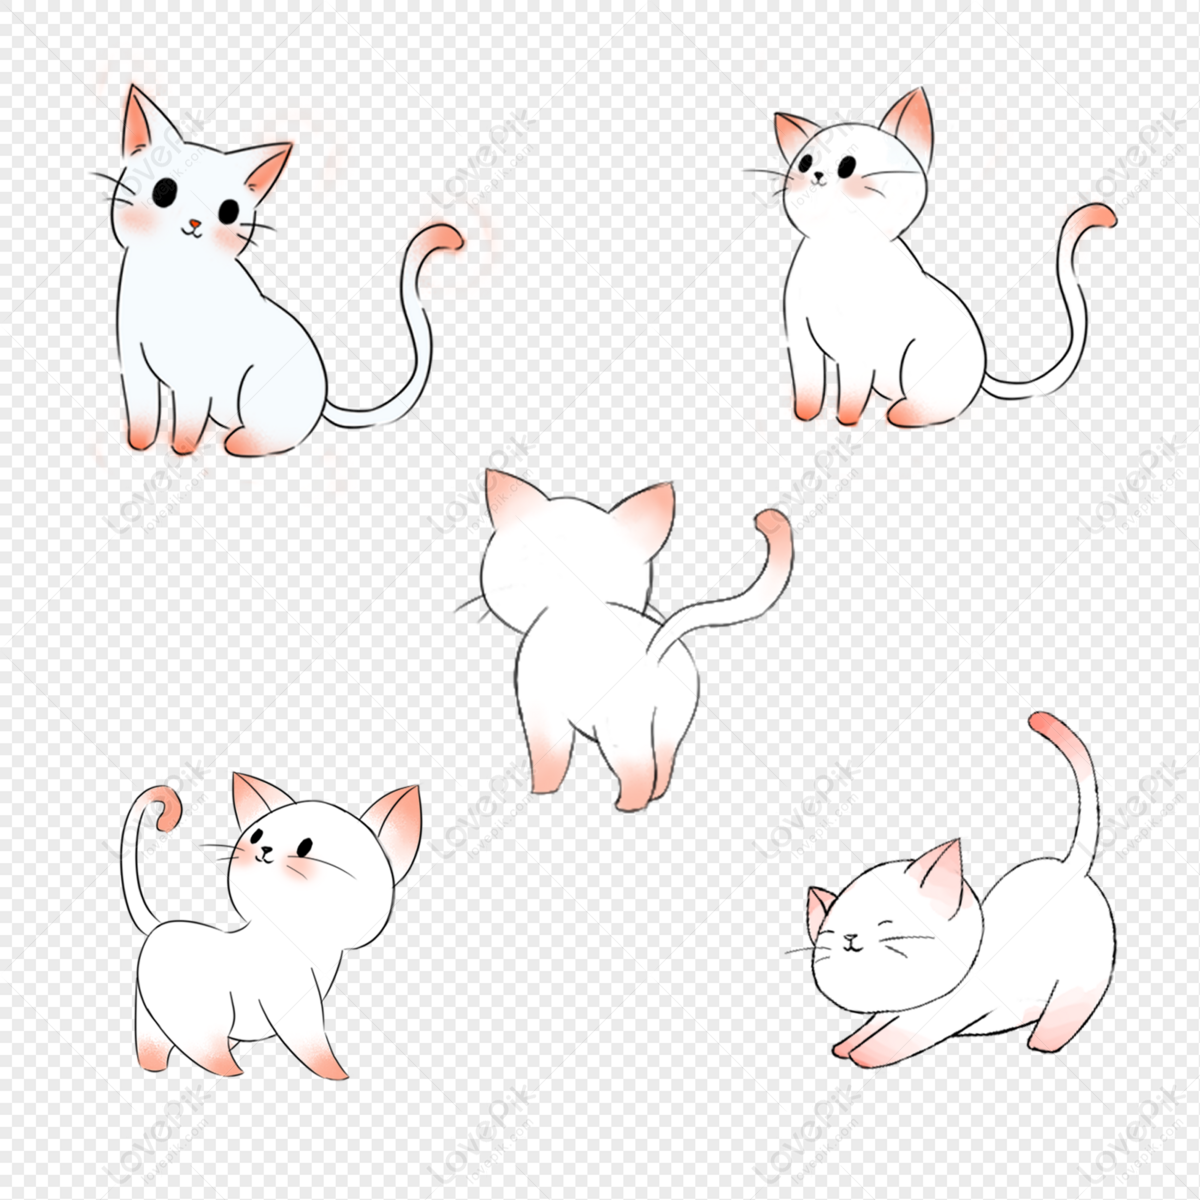 Cat PNG Transparent Background And Clipart Image For Free Download -  Lovepik | 401517780